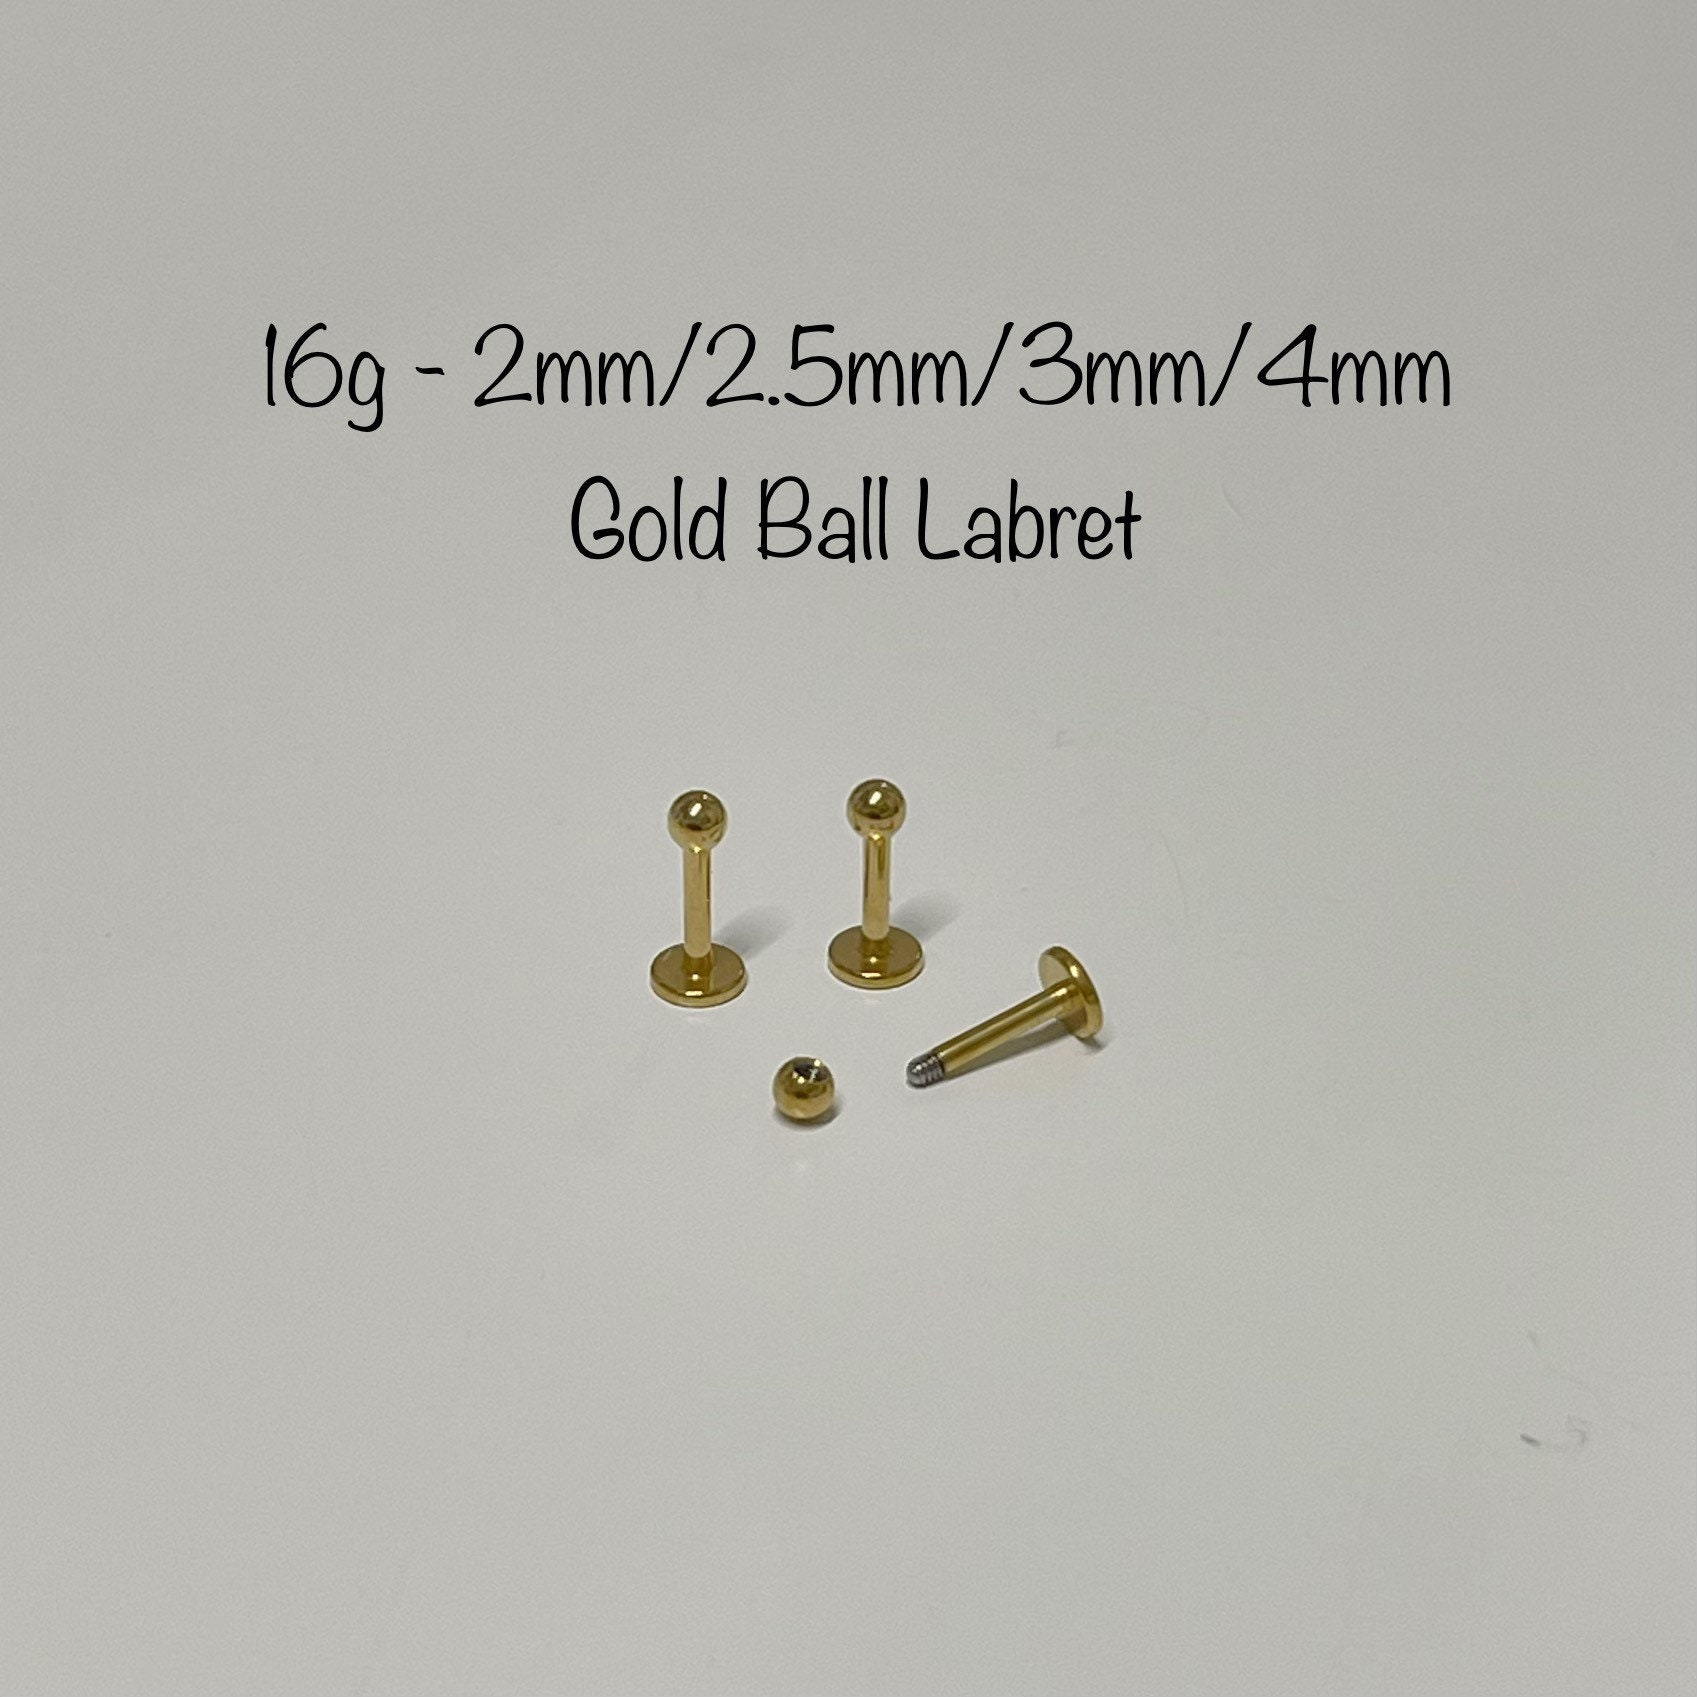 Grabber Tool for End Balls, for 3mm and 4mm Round End Balls, 